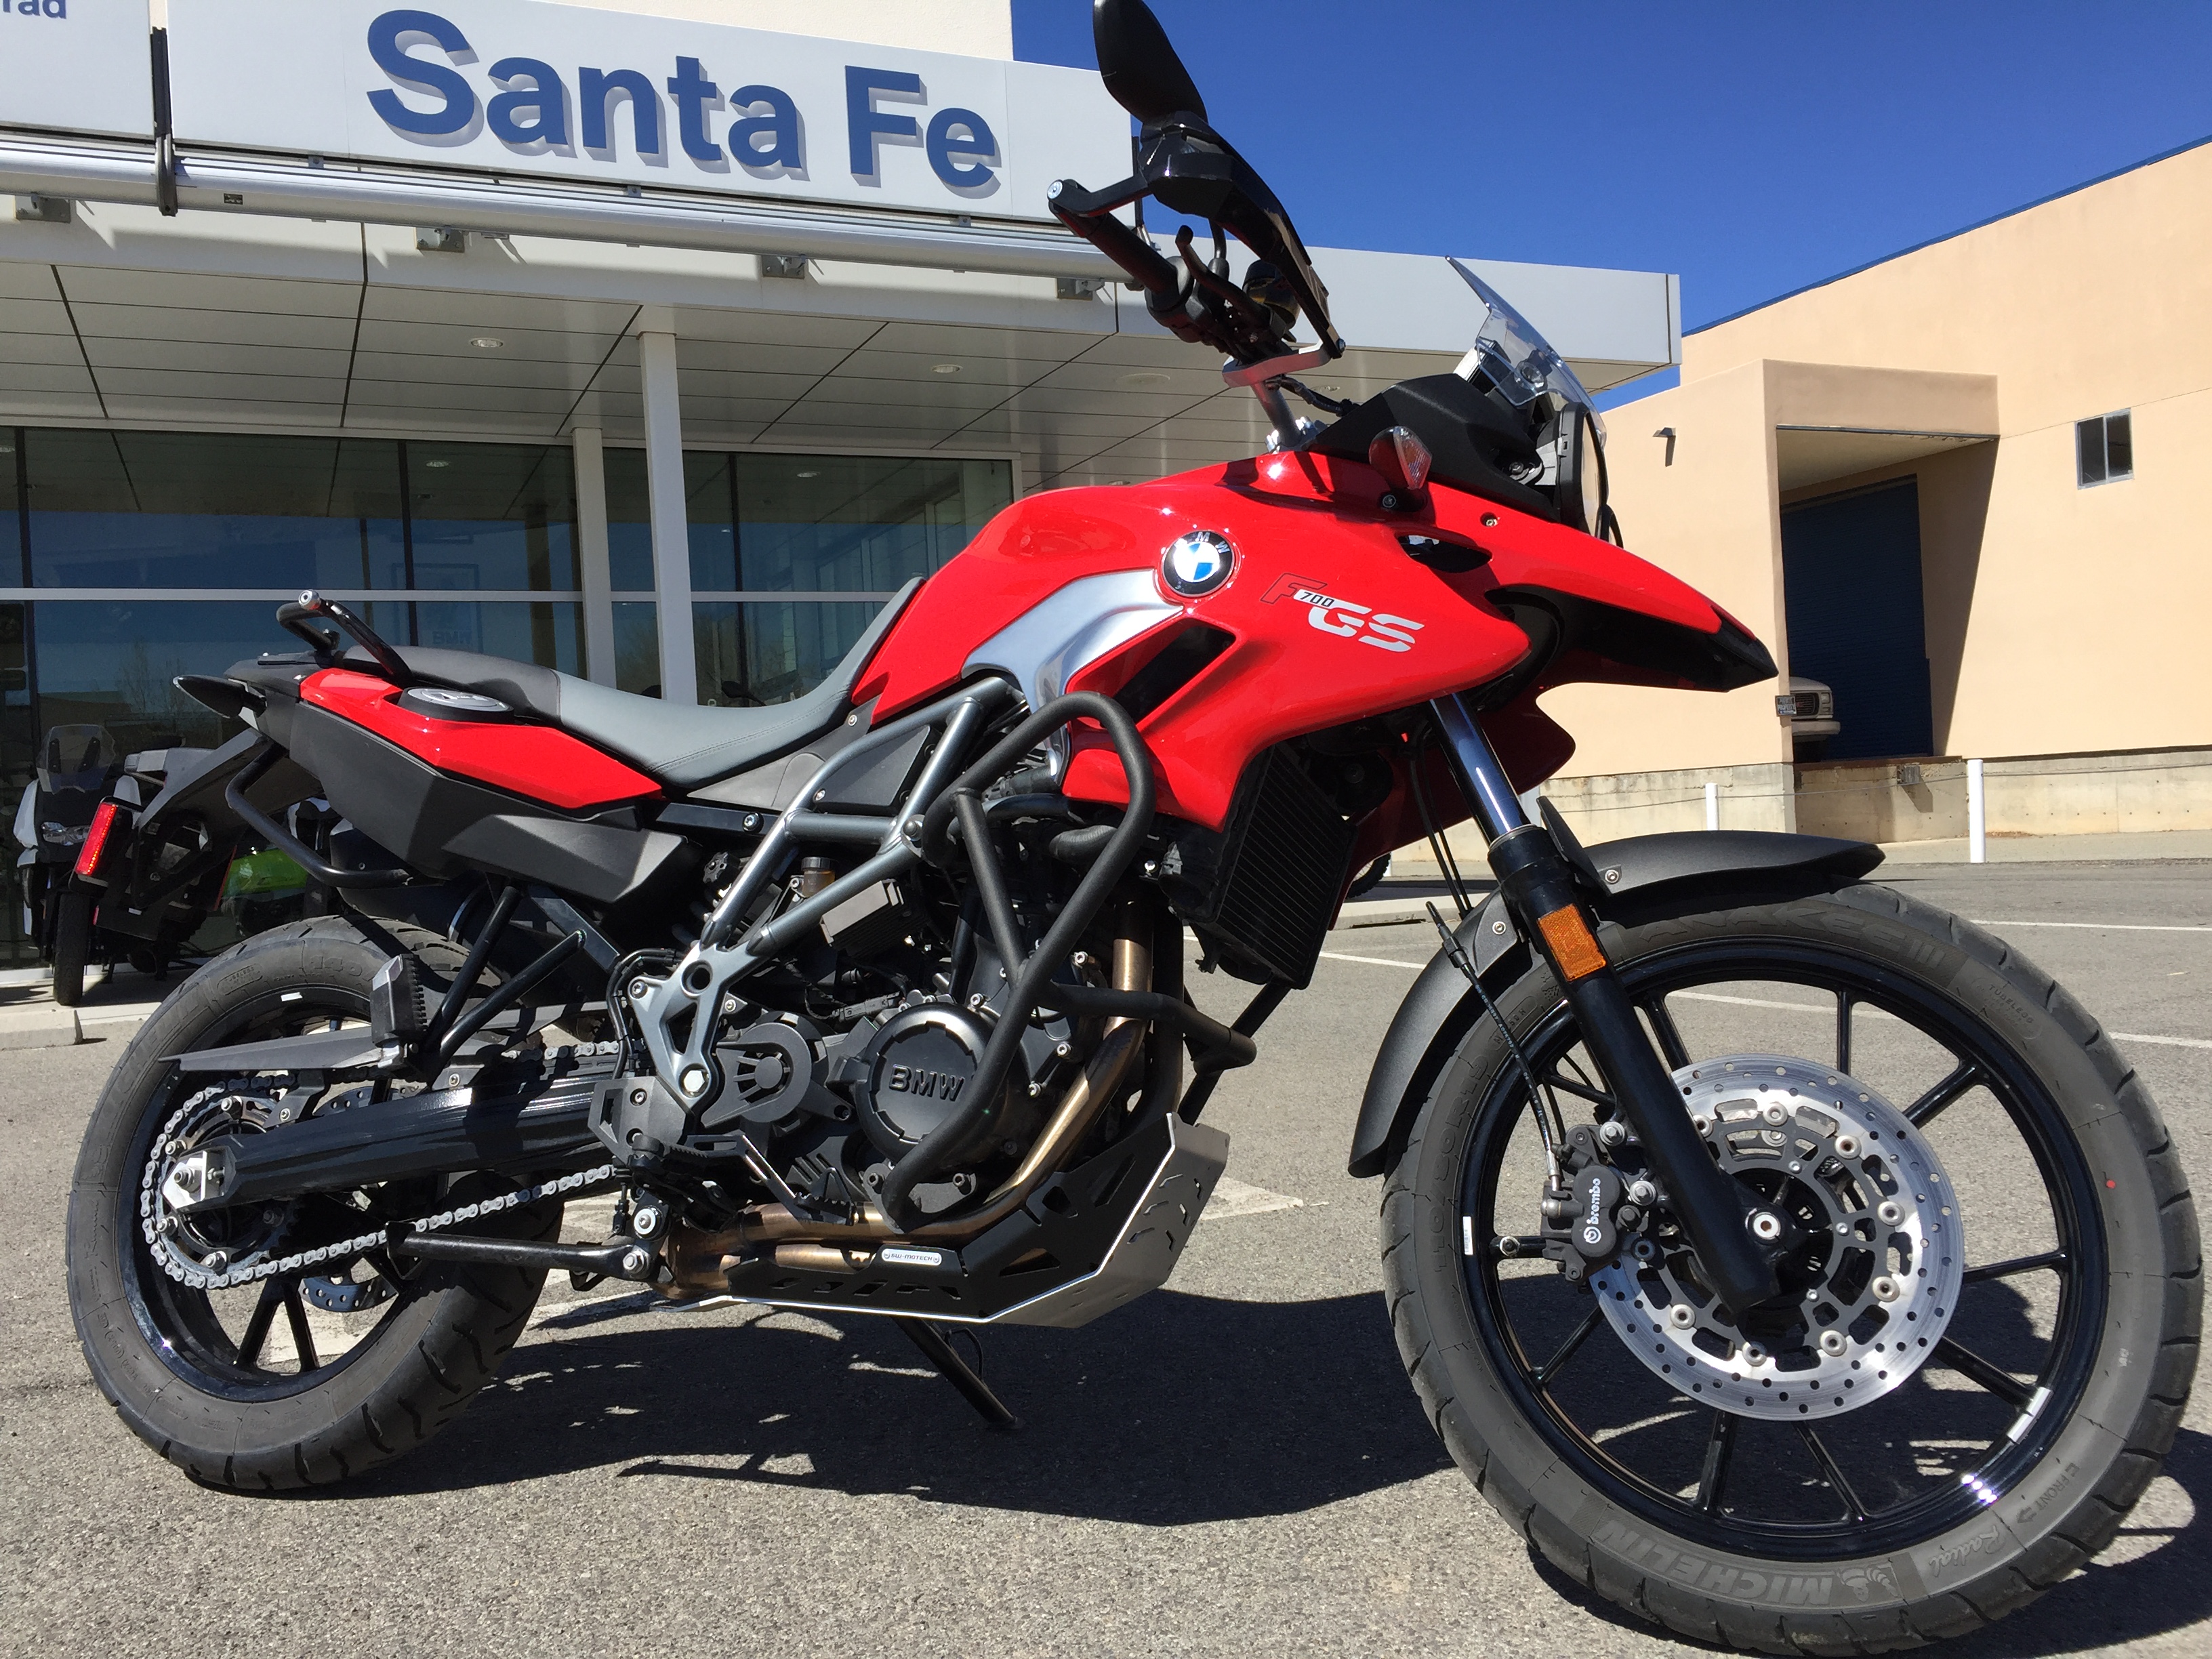 Pre-Owned Motorcycle Inventory - F700GS - Santa Fe BMW Motorcycles